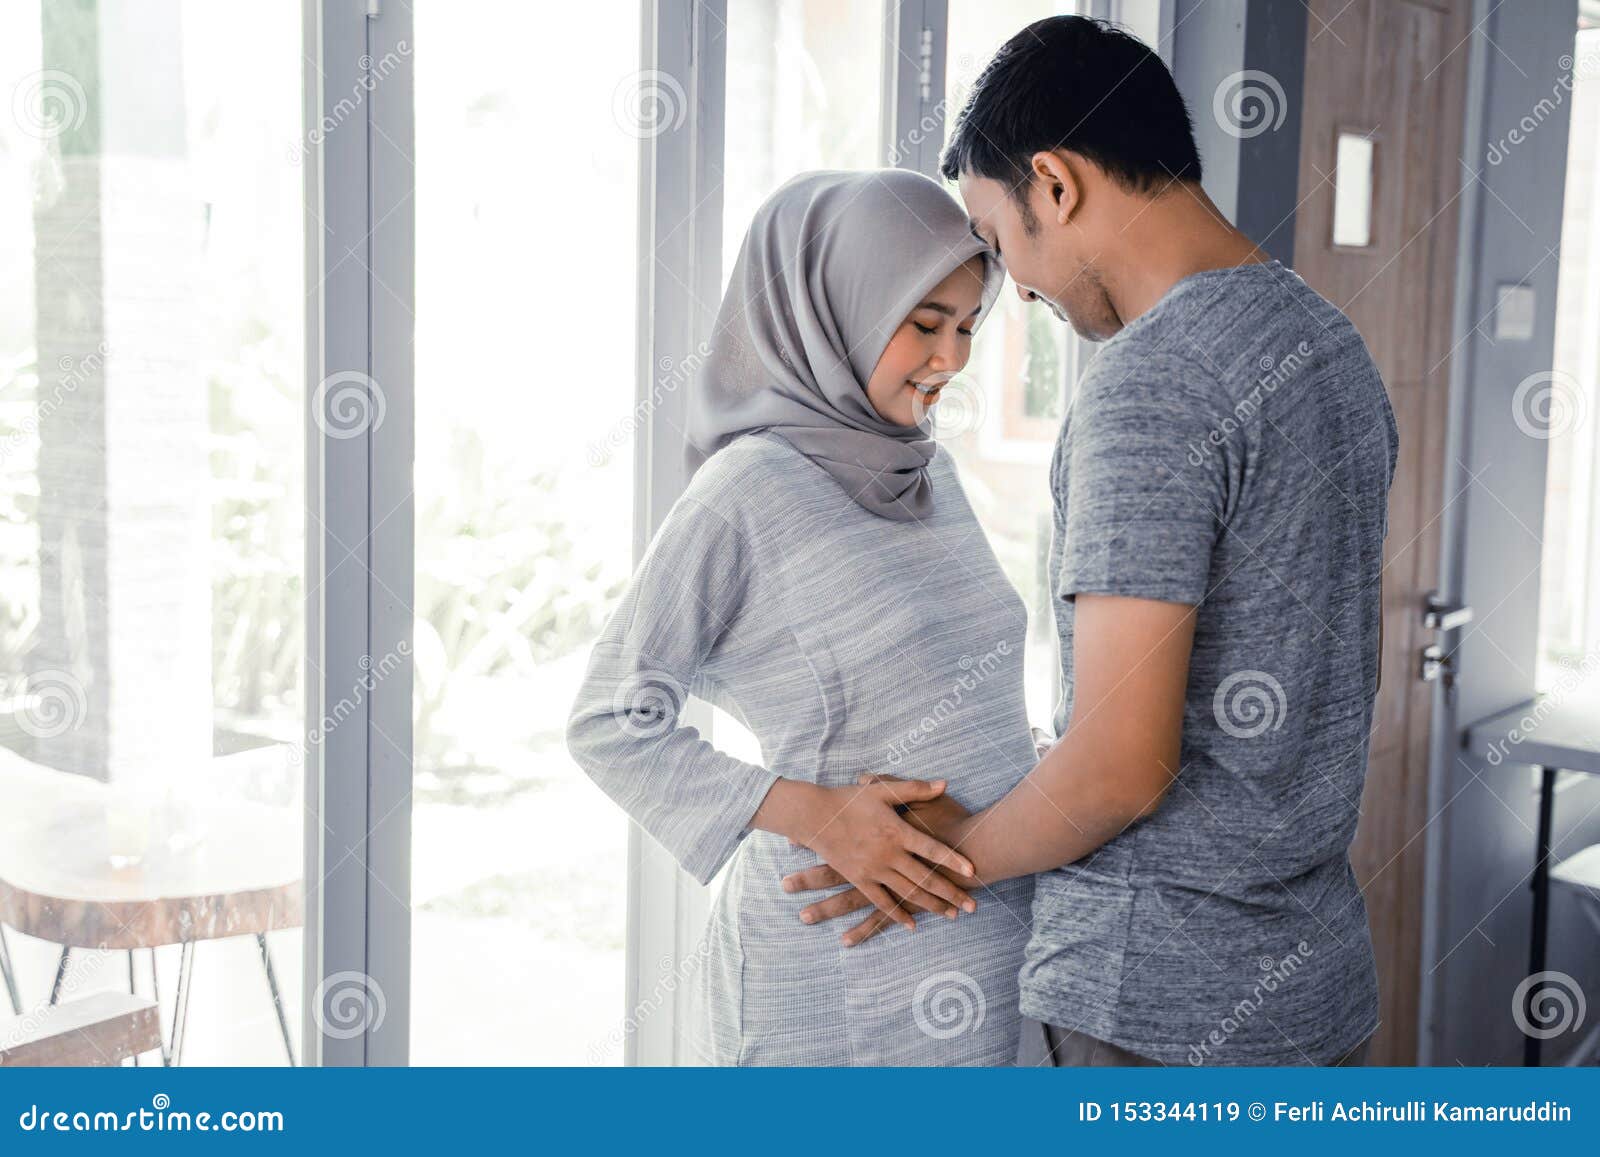 Romantic Husband and Wife Muslim Face To Face Each Other Stock ...